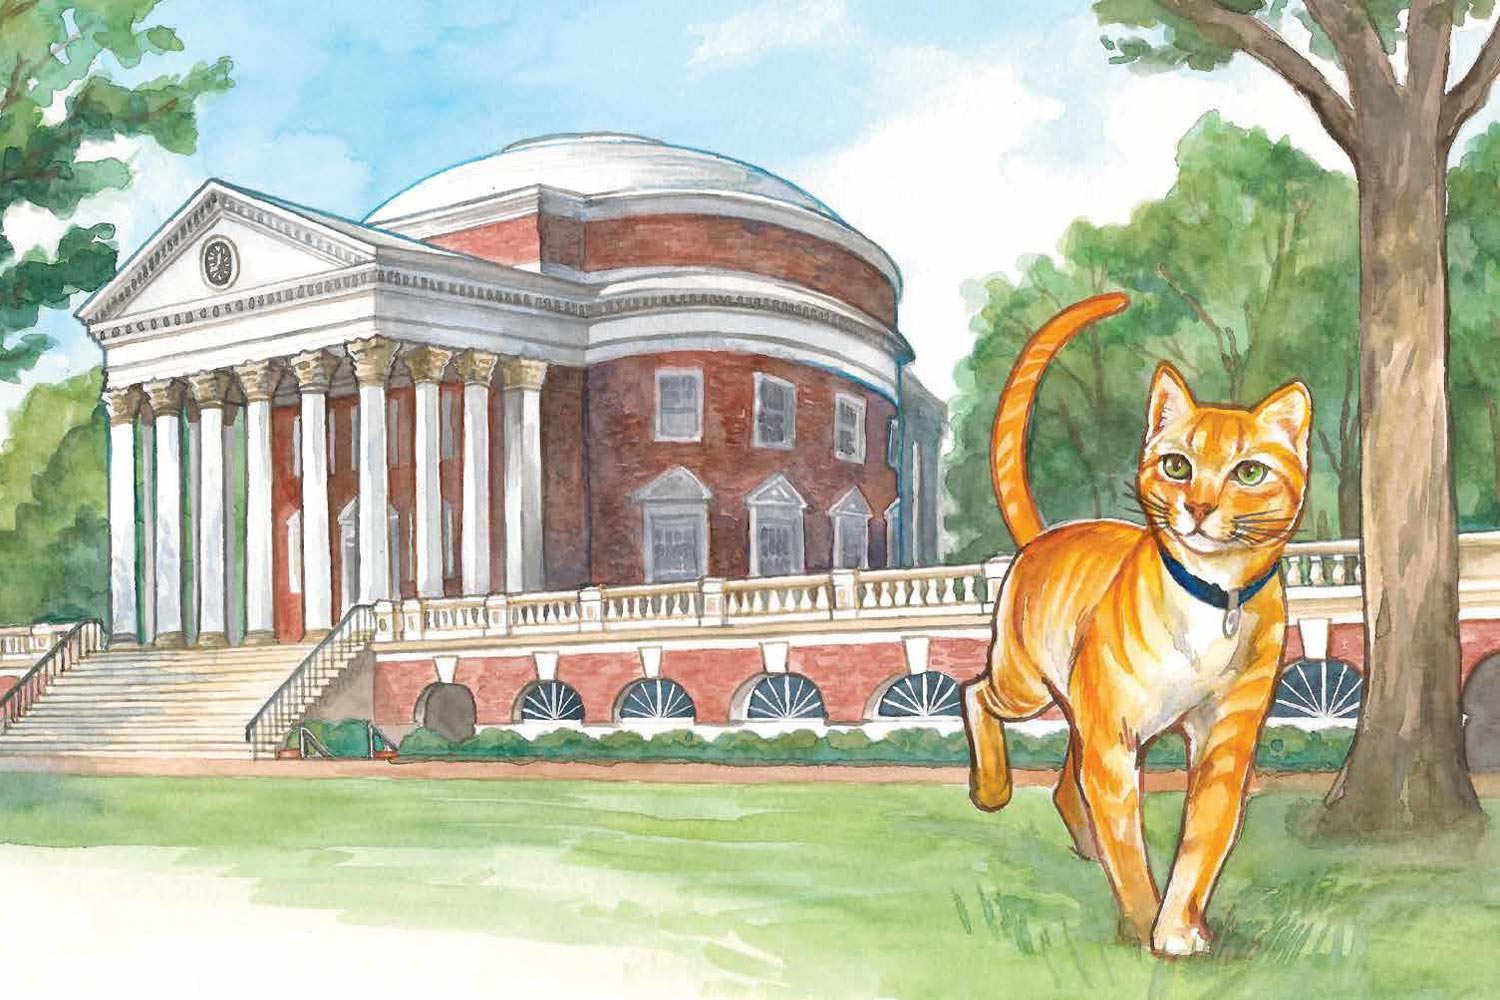 Illustration of an orange cat in front of the Rotunda